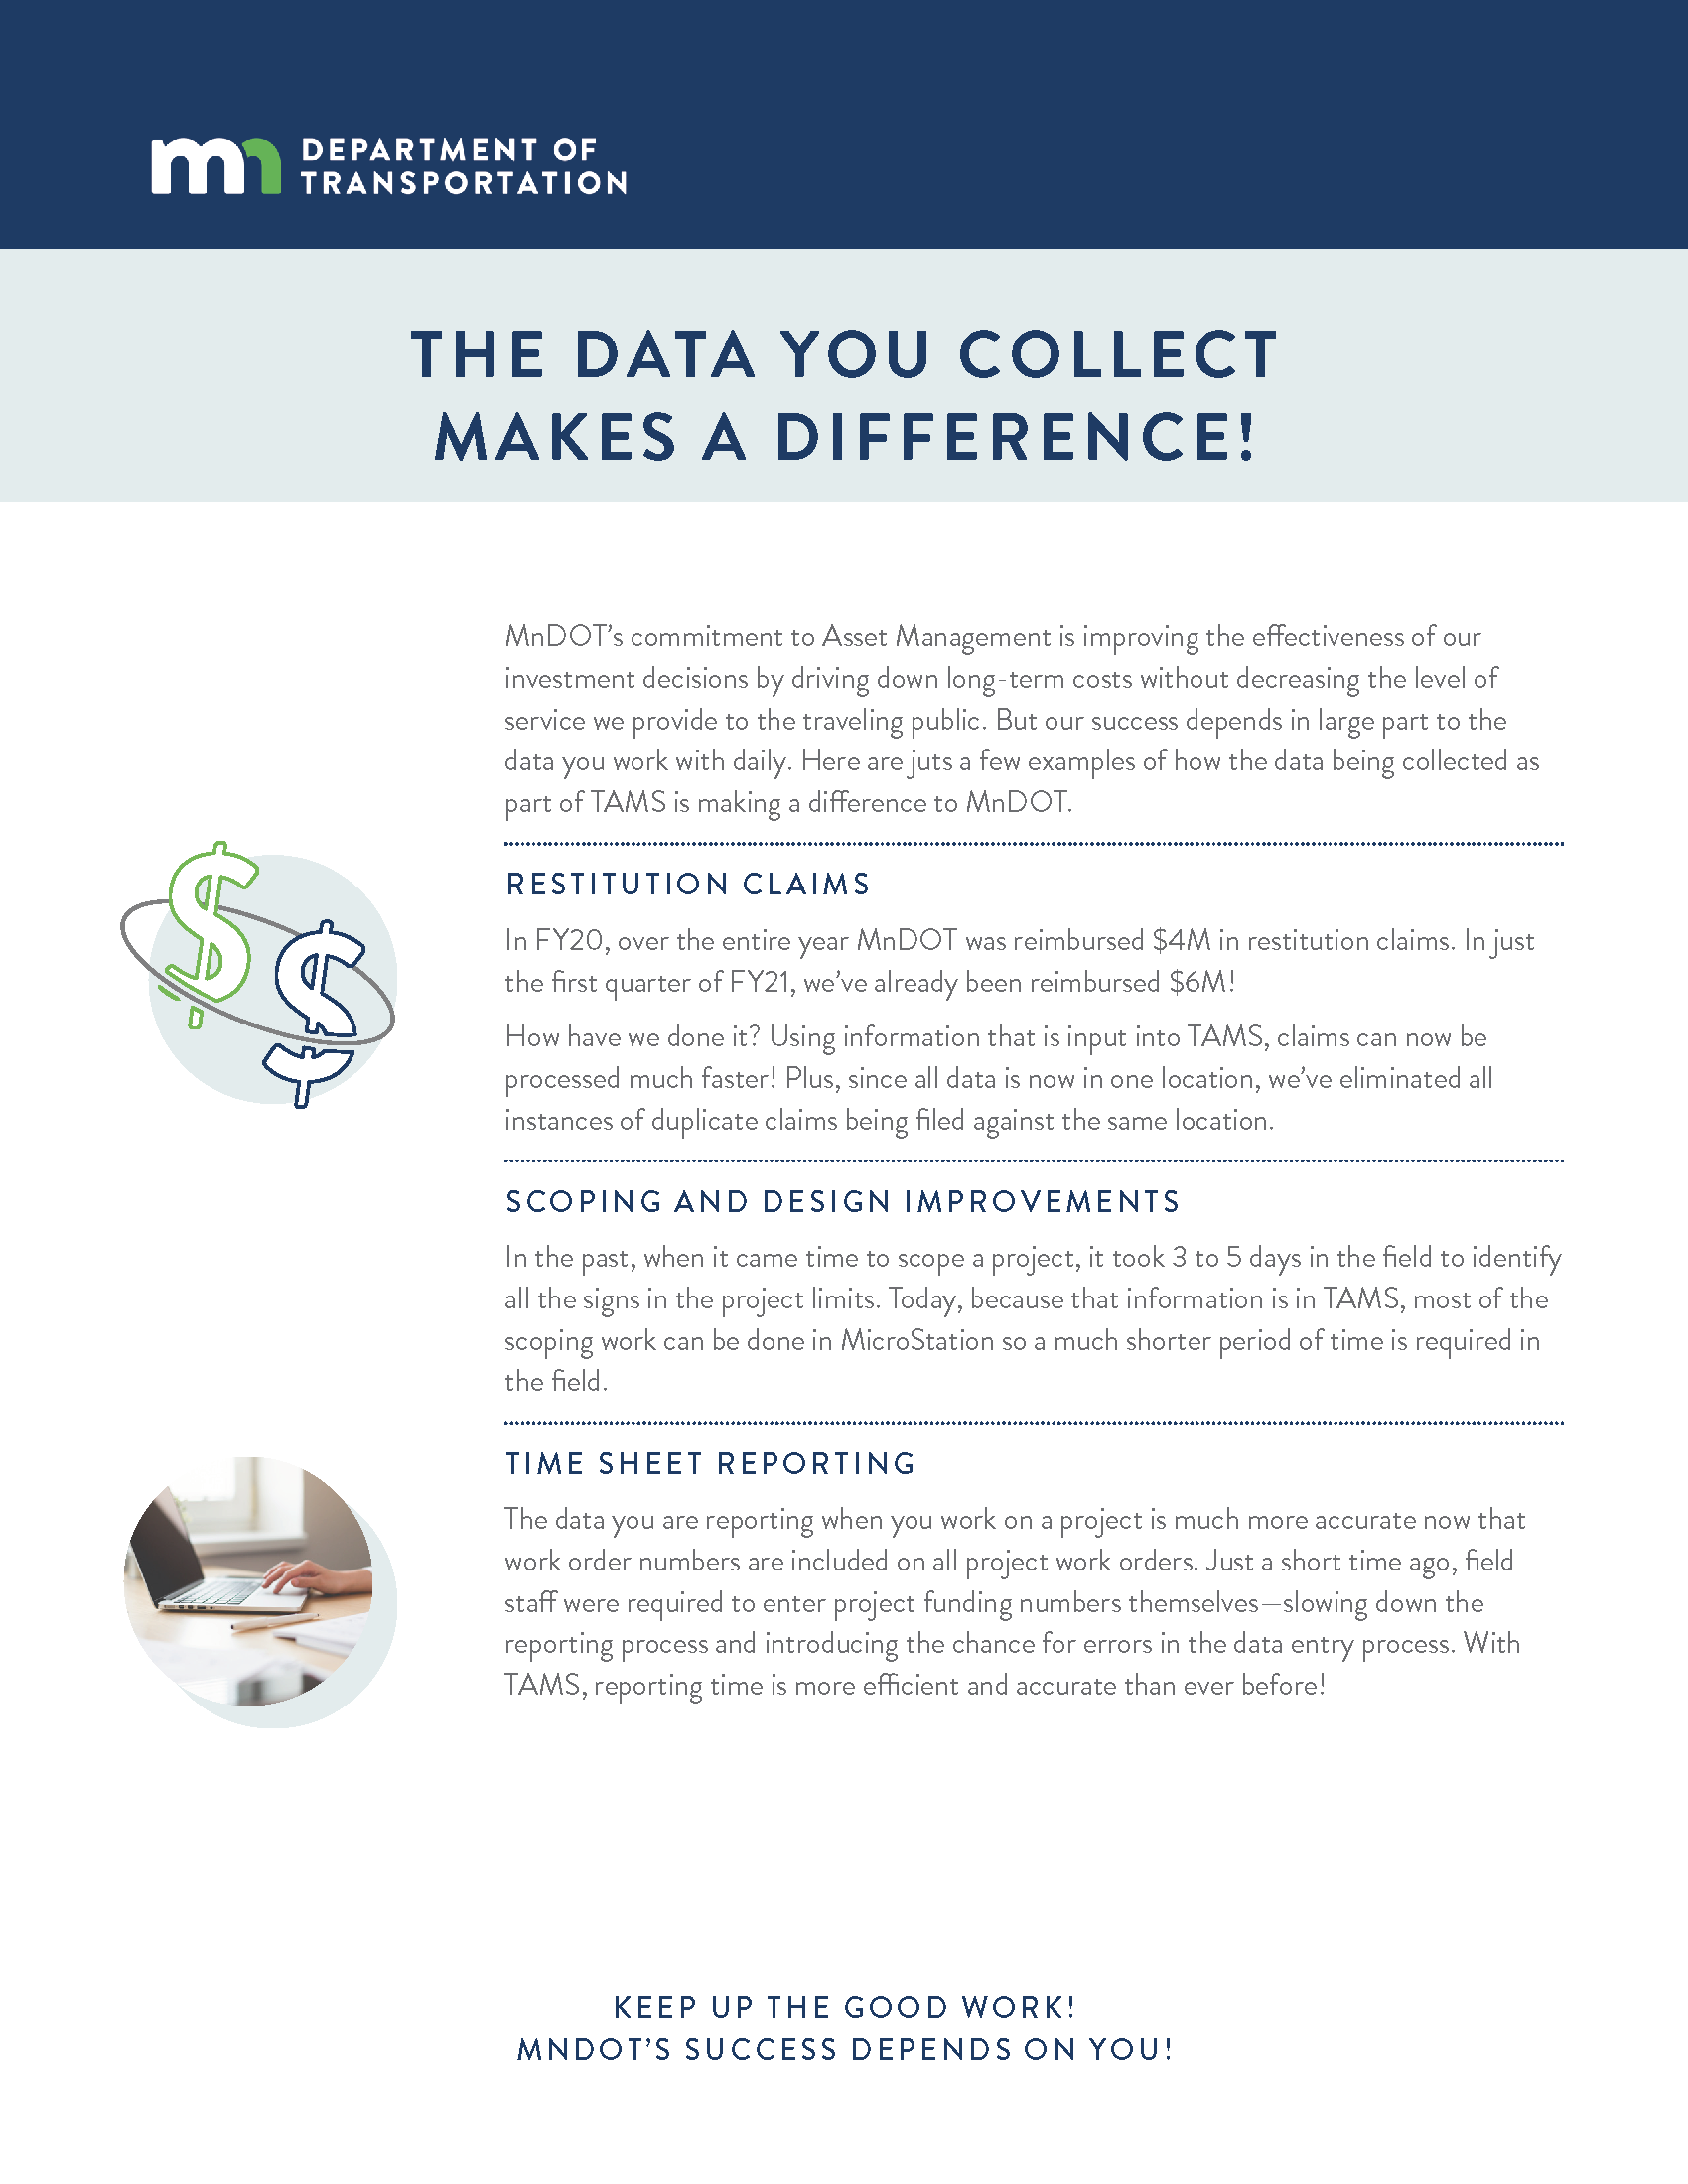 The Data You Collect Makes a Difference (flyer)